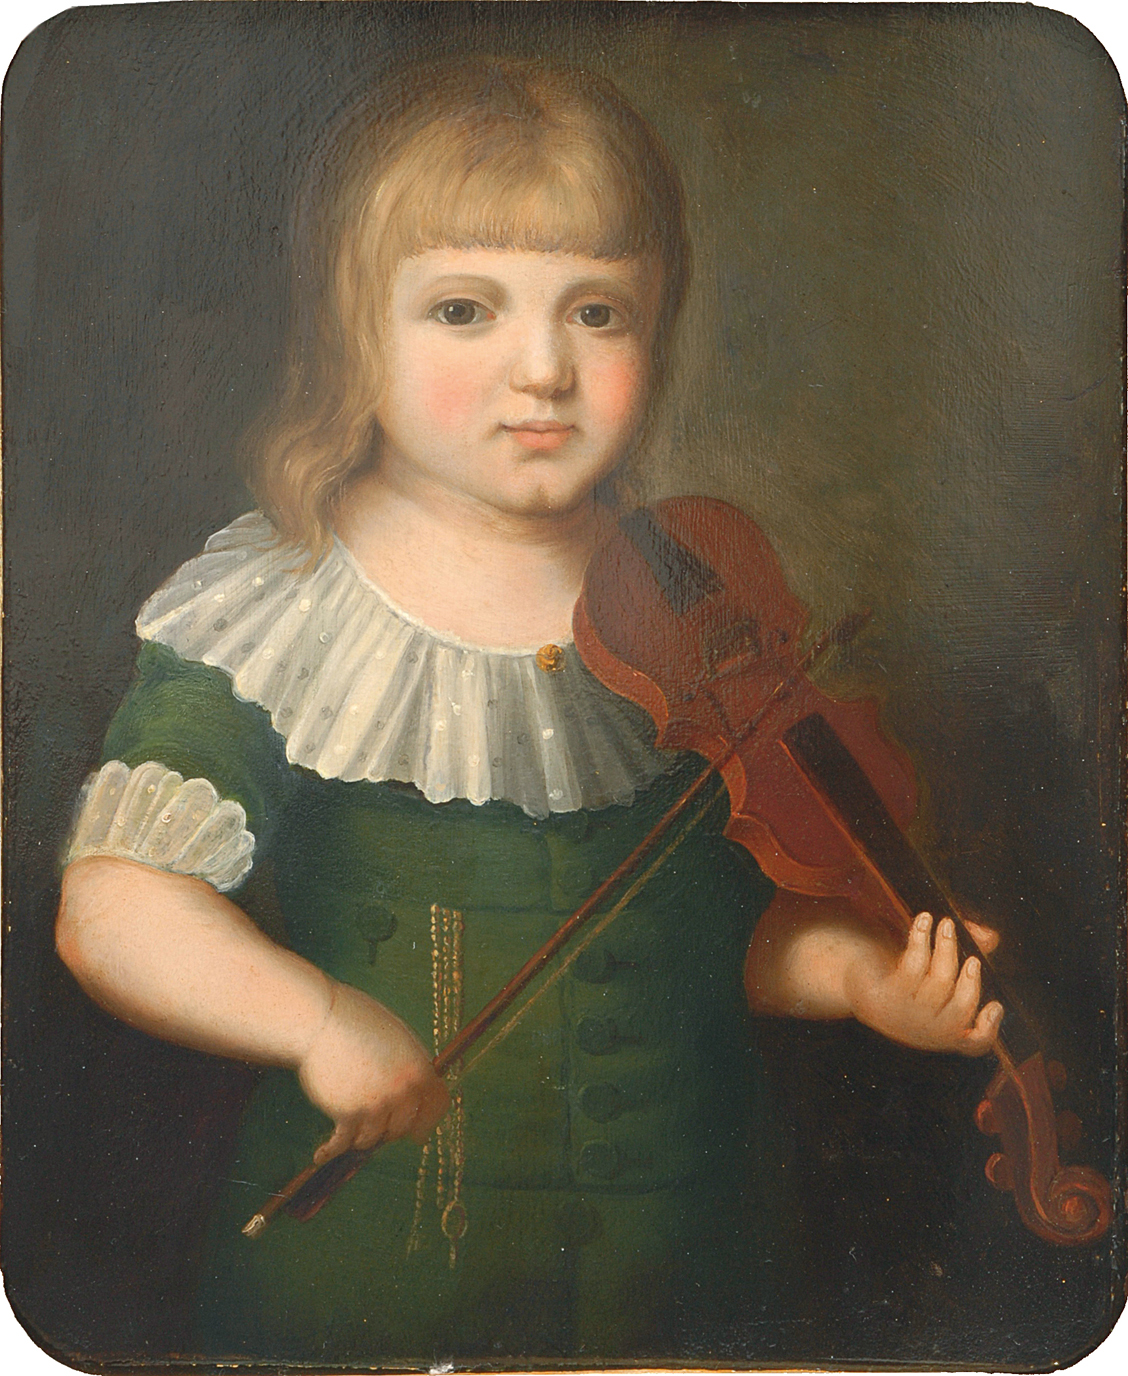 A young violin player